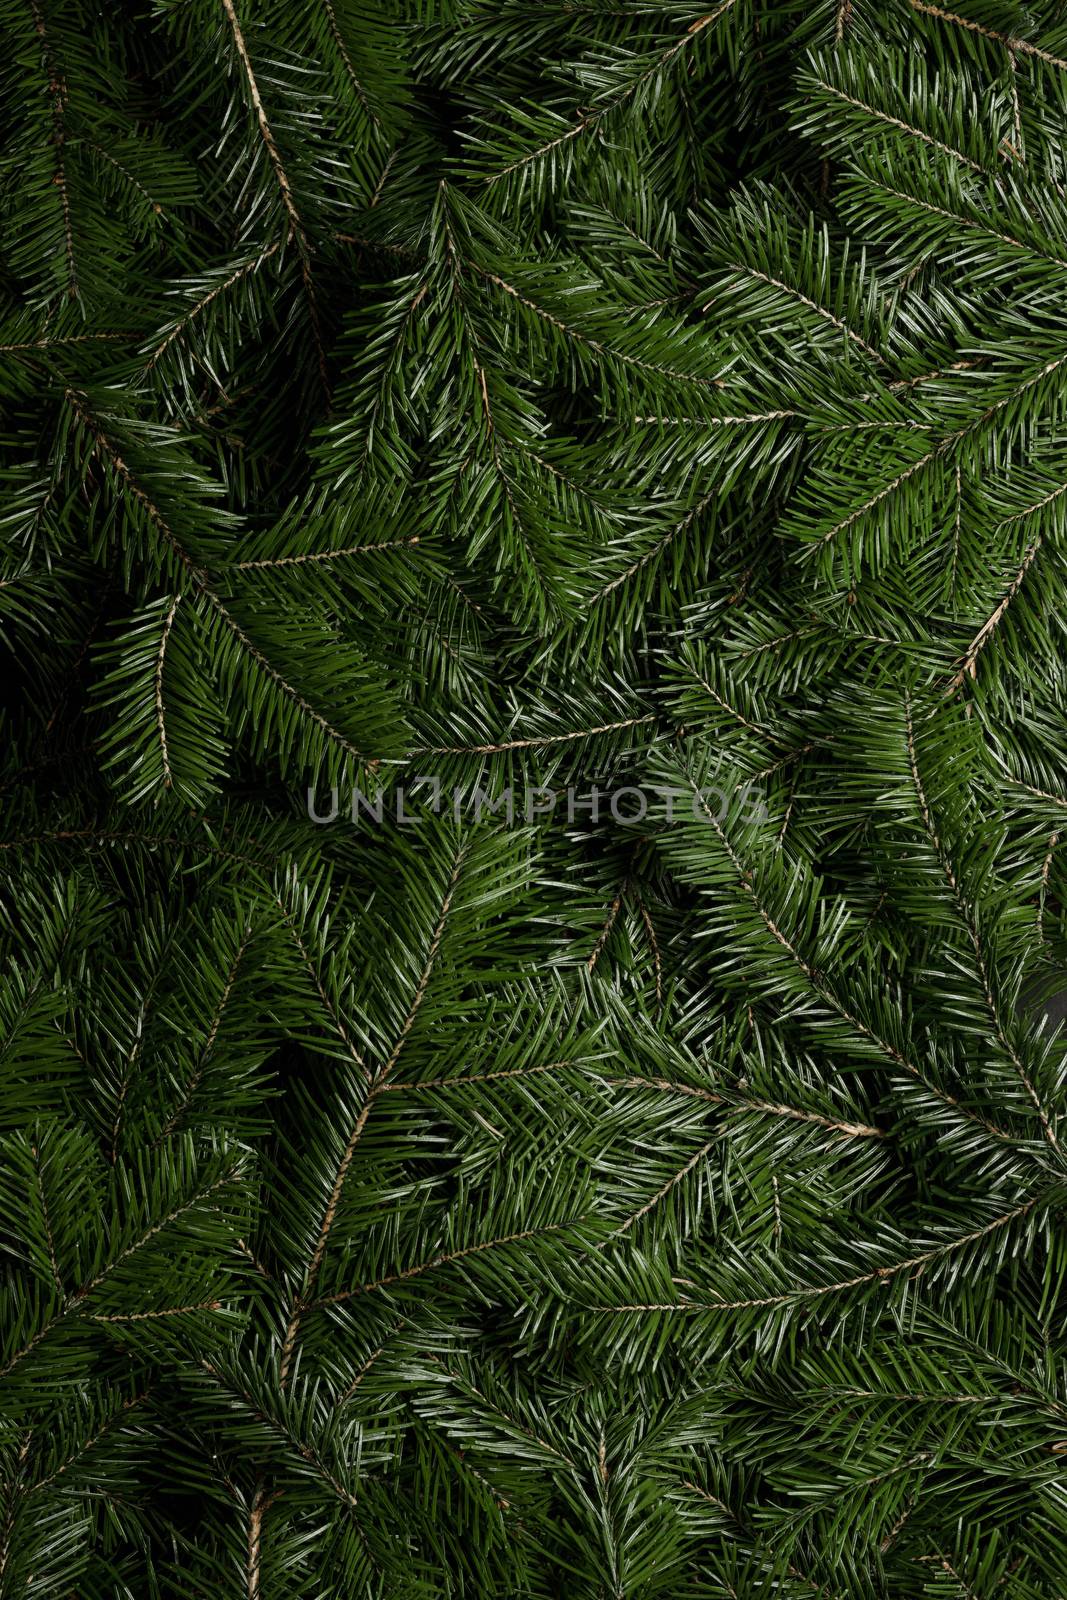 Background of green fir branches by Yellowj